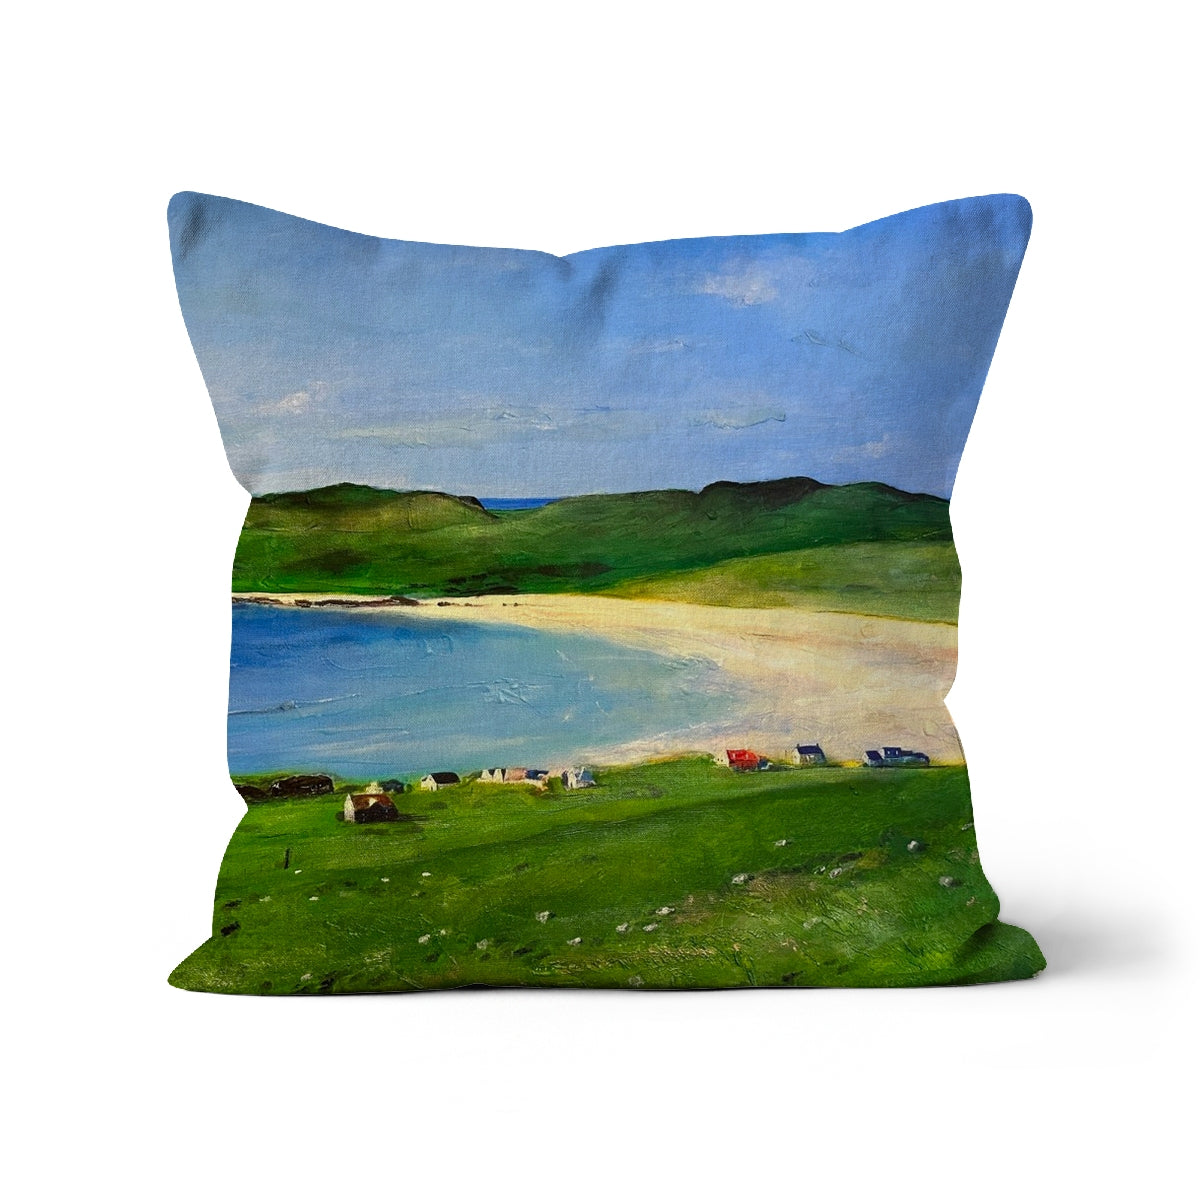 Balephuil Beach Tiree Art Gifts Cushion-Cushions-Hebridean Islands Art Gallery-Canvas-22"x22"-Paintings, Prints, Homeware, Art Gifts From Scotland By Scottish Artist Kevin Hunter